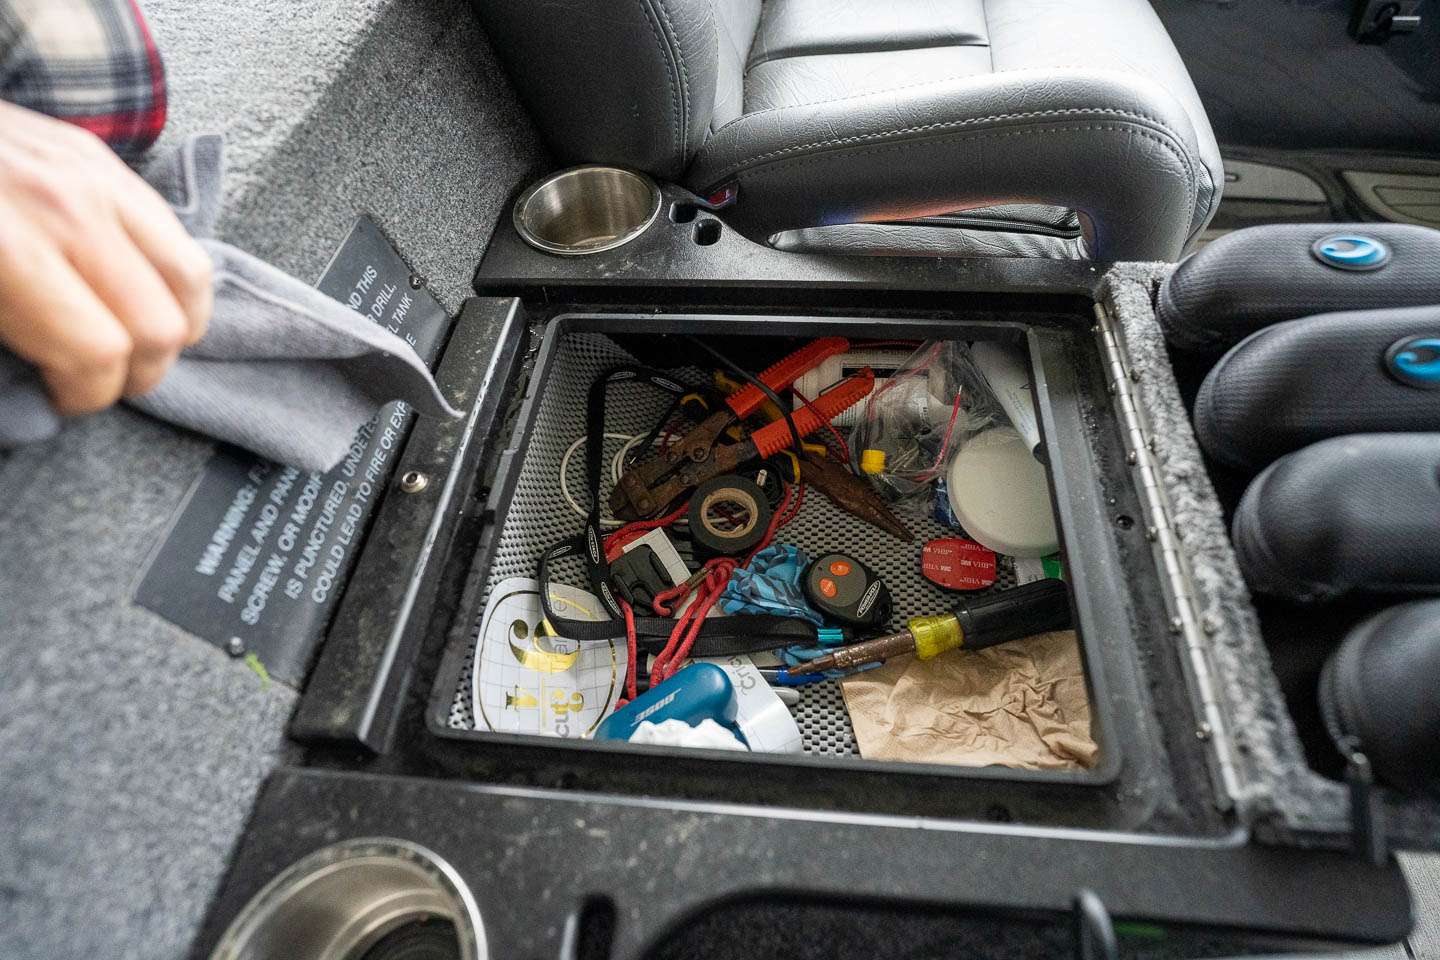 Underneath are more tools and various items he can get to while driving the boat. 